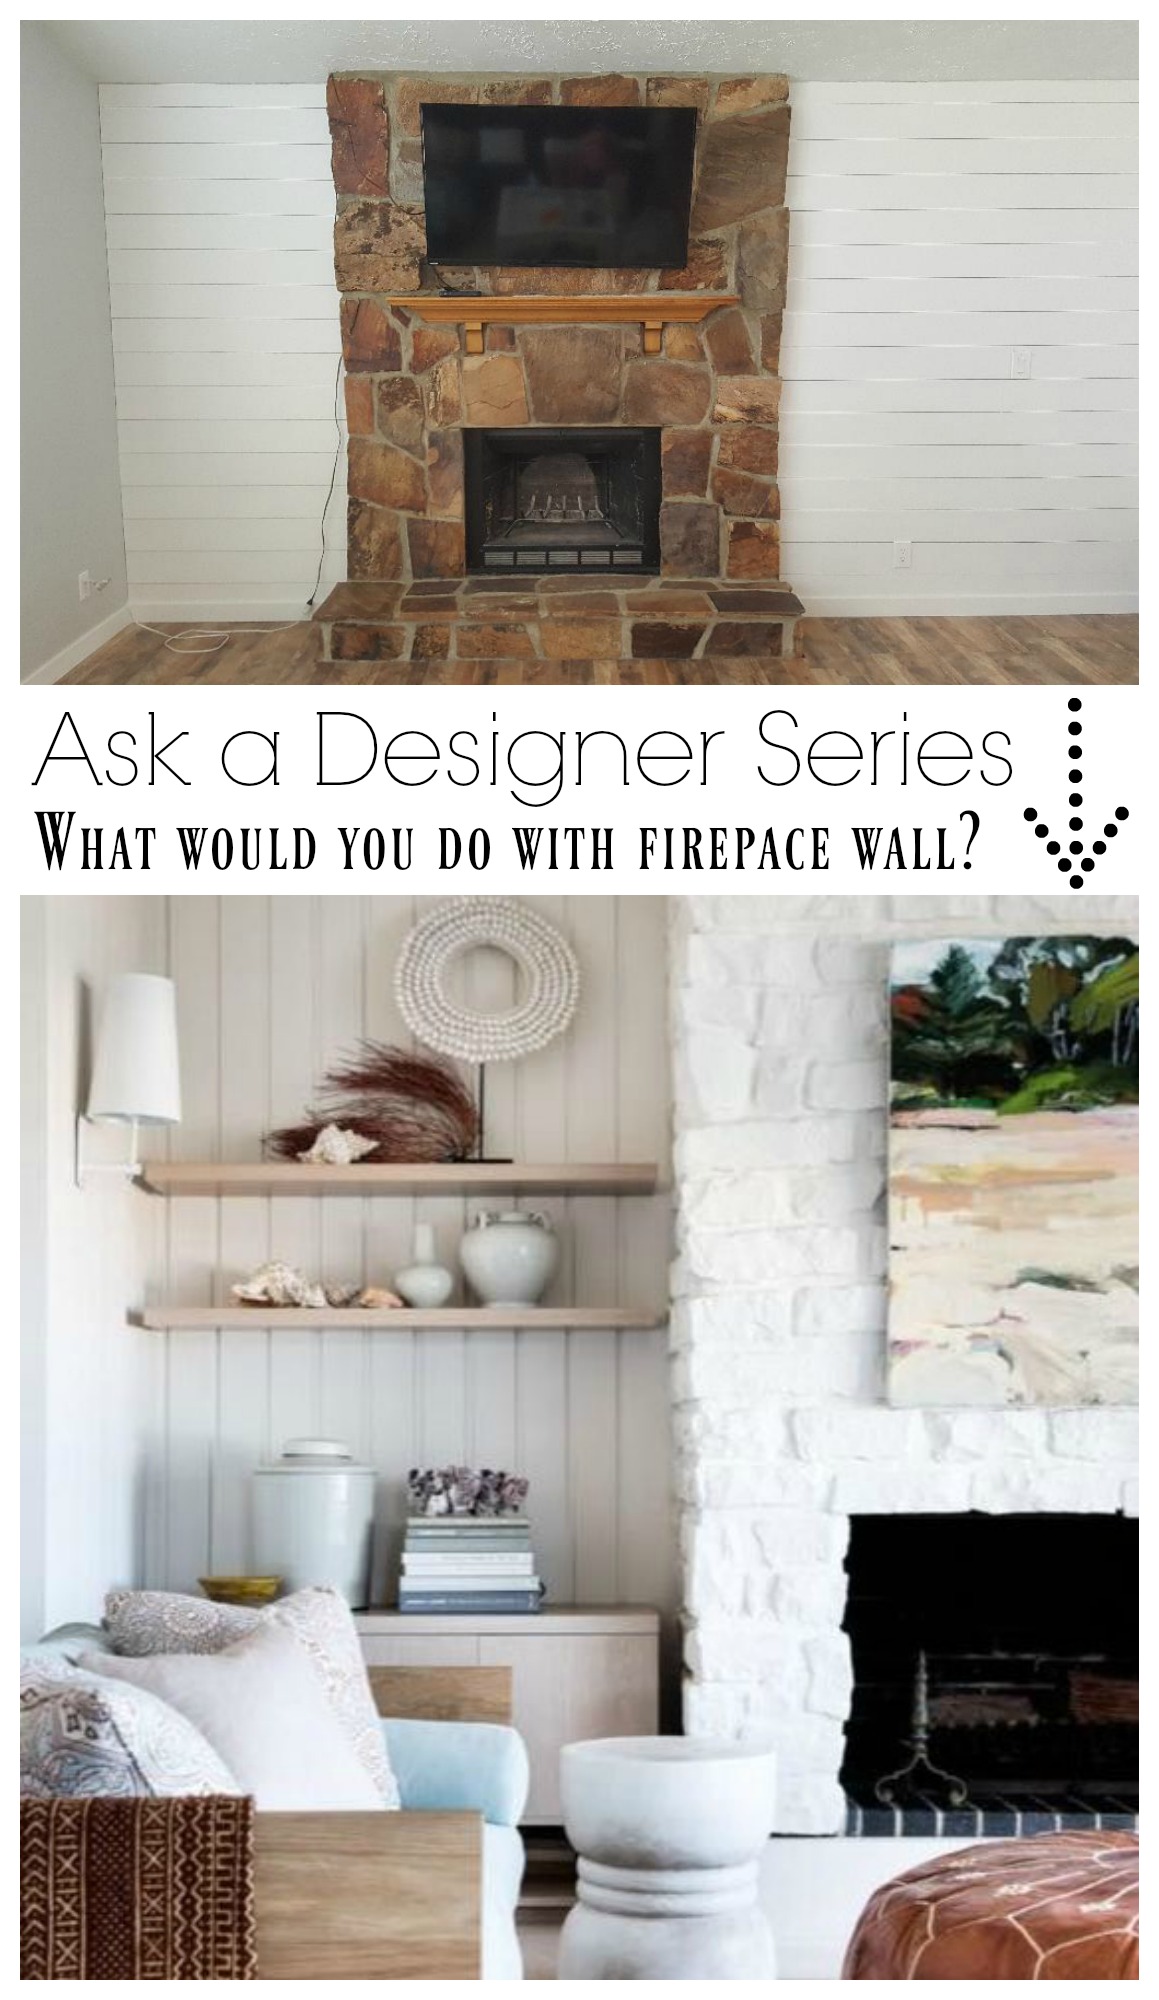 Ask a Designer Series- What would you do with Fireplace wall?